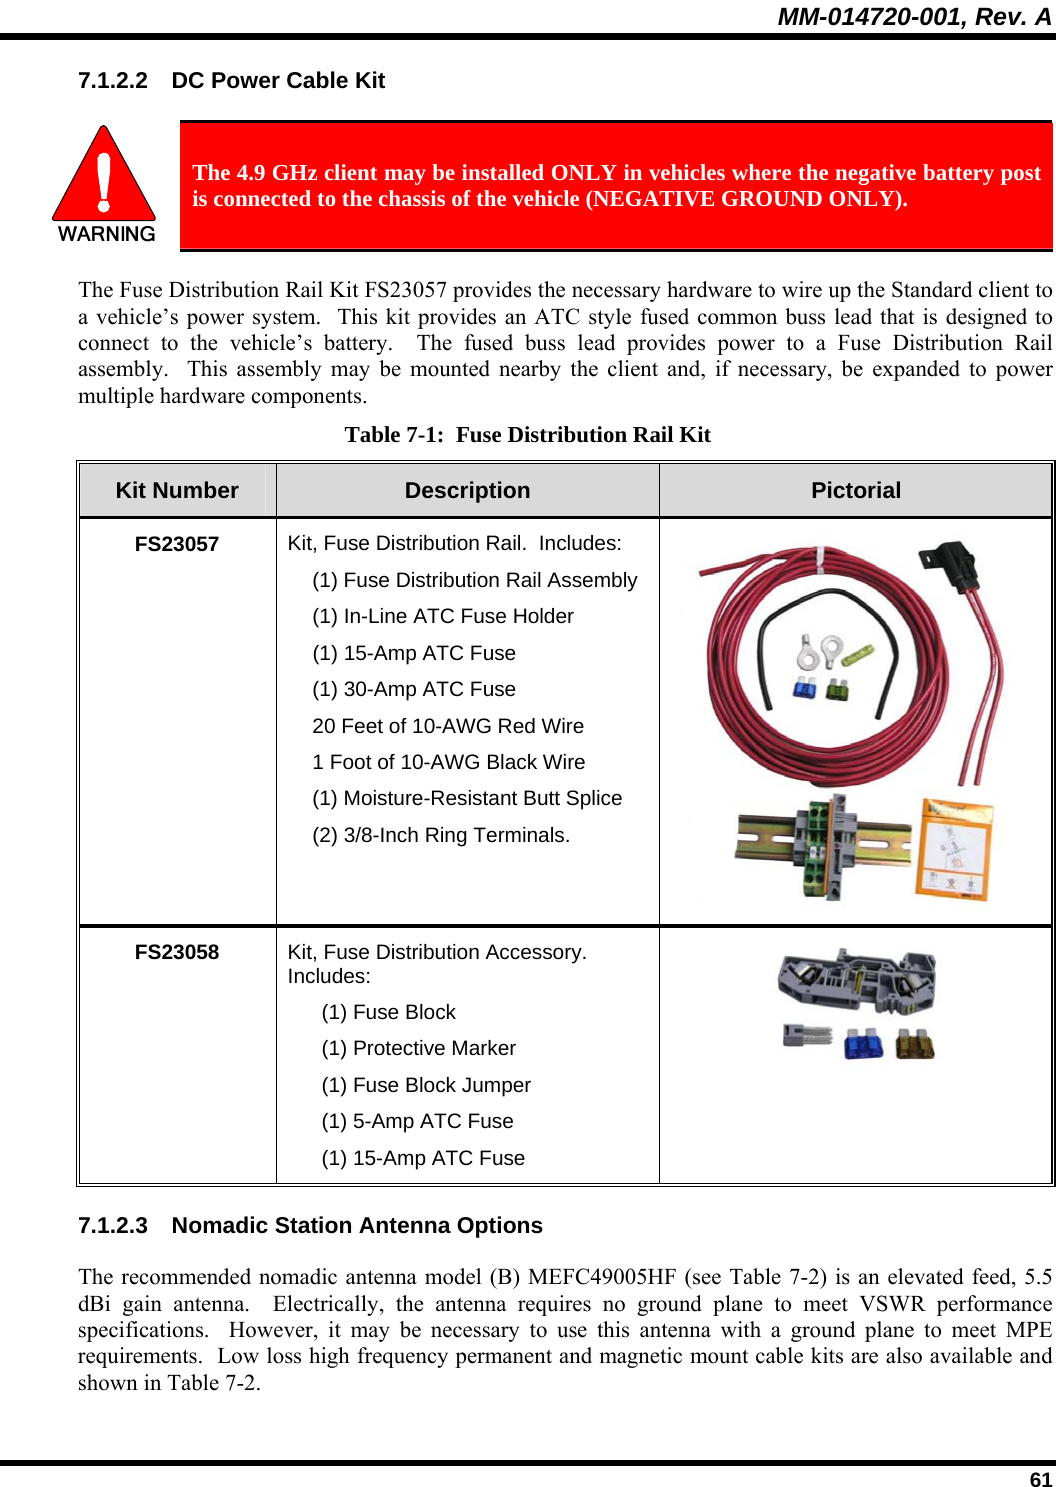 MM-014720-001, Rev. A  61 7.1.2.2  DC Power Cable Kit   The 4.9 GHz client may be installed ONLY in vehicles where the negative battery post is connected to the chassis of the vehicle (NEGATIVE GROUND ONLY). The Fuse Distribution Rail Kit FS23057 provides the necessary hardware to wire up the Standard client to a vehicle’s power system.  This kit provides an ATC style fused common buss lead that is designed to connect to the vehicle’s battery.  The fused buss lead provides power to a Fuse Distribution Rail assembly.  This assembly may be mounted nearby the client and, if necessary, be expanded to power multiple hardware components. Table 7-1:  Fuse Distribution Rail Kit Kit Number  Description  Pictorial FS23057  Kit, Fuse Distribution Rail.  Includes:   (1) Fuse Distribution Rail Assembly   (1) In-Line ATC Fuse Holder  (1) 15-Amp ATC Fuse   (1) 30-Amp ATC Fuse   20 Feet of 10-AWG Red Wire   1 Foot of 10-AWG Black Wire   (1) Moisture-Resistant Butt Splice   (2) 3/8-Inch Ring Terminals. FS23058  Kit, Fuse Distribution Accessory.  Includes:   (1) Fuse Block   (1) Protective Marker   (1) Fuse Block Jumper   (1) 5-Amp ATC Fuse   (1) 15-Amp ATC Fuse  7.1.2.3  Nomadic Station Antenna Options The recommended nomadic antenna model (B) MEFC49005HF (see Table 7-2) is an elevated feed, 5.5 dBi gain antenna.  Electrically, the antenna requires no ground plane to meet VSWR performance specifications.  However, it may be necessary to use this antenna with a ground plane to meet MPE requirements.  Low loss high frequency permanent and magnetic mount cable kits are also available and shown in Table 7-2. 